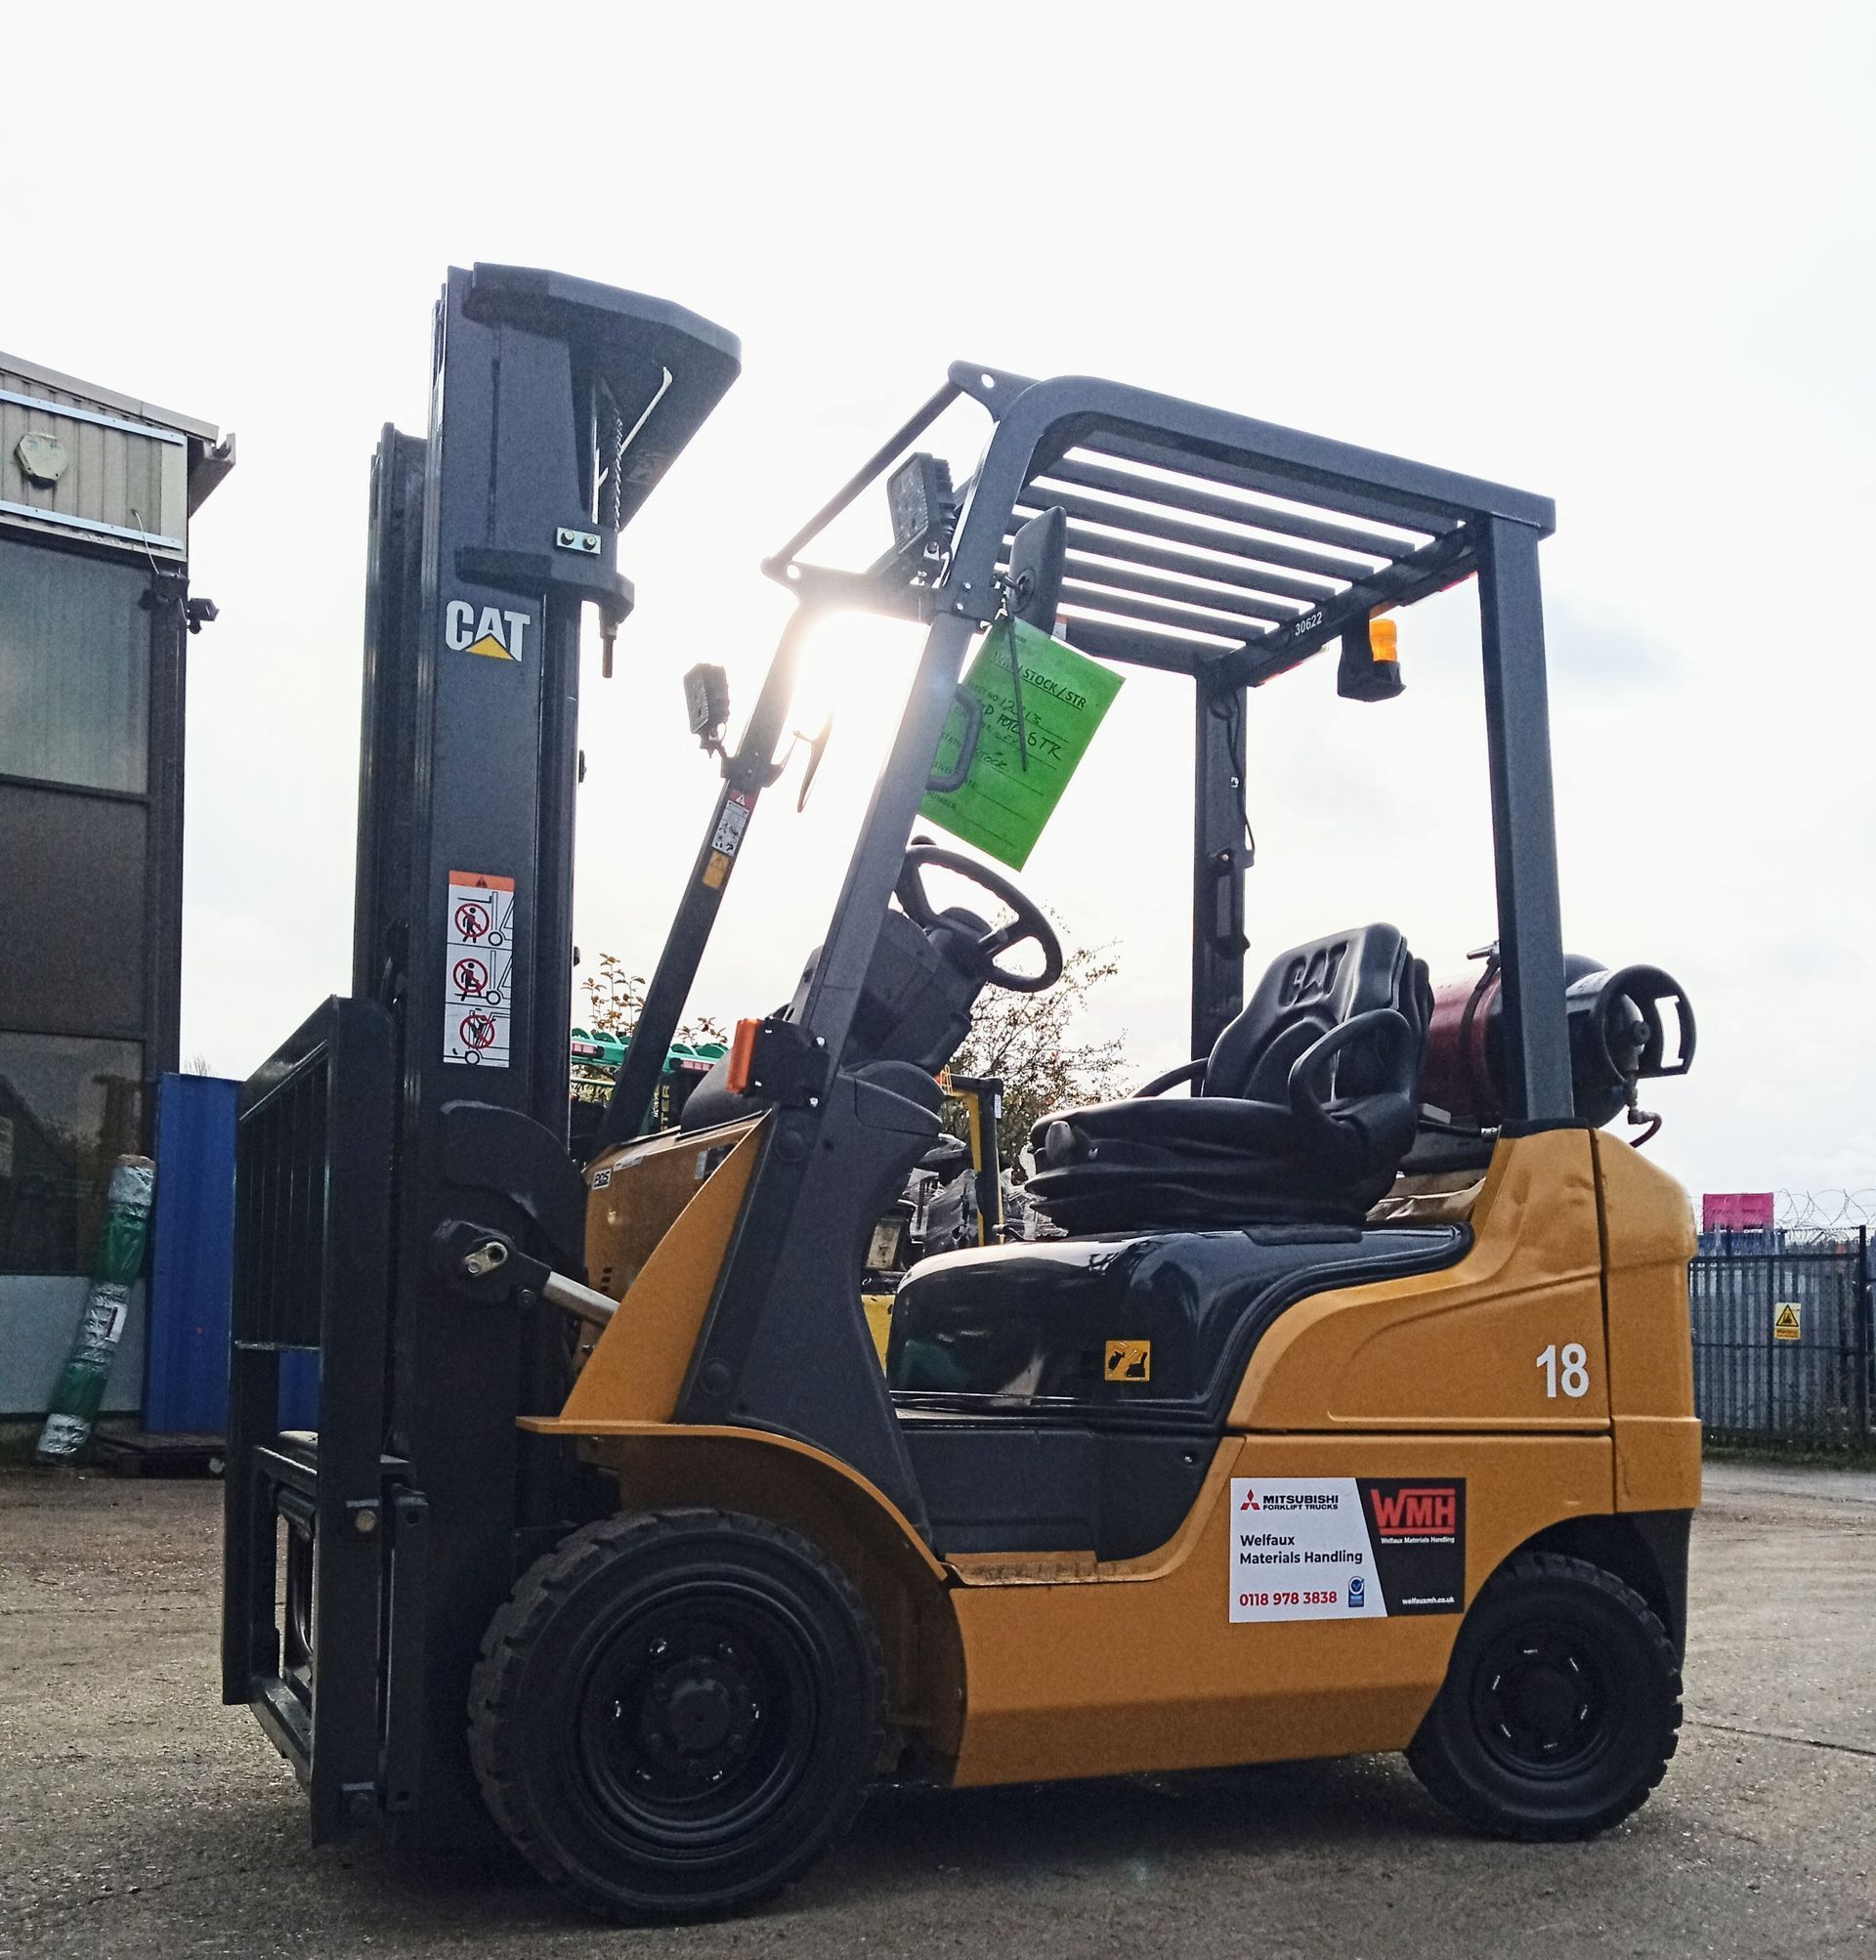 A cat forklift is parked in a parking lot